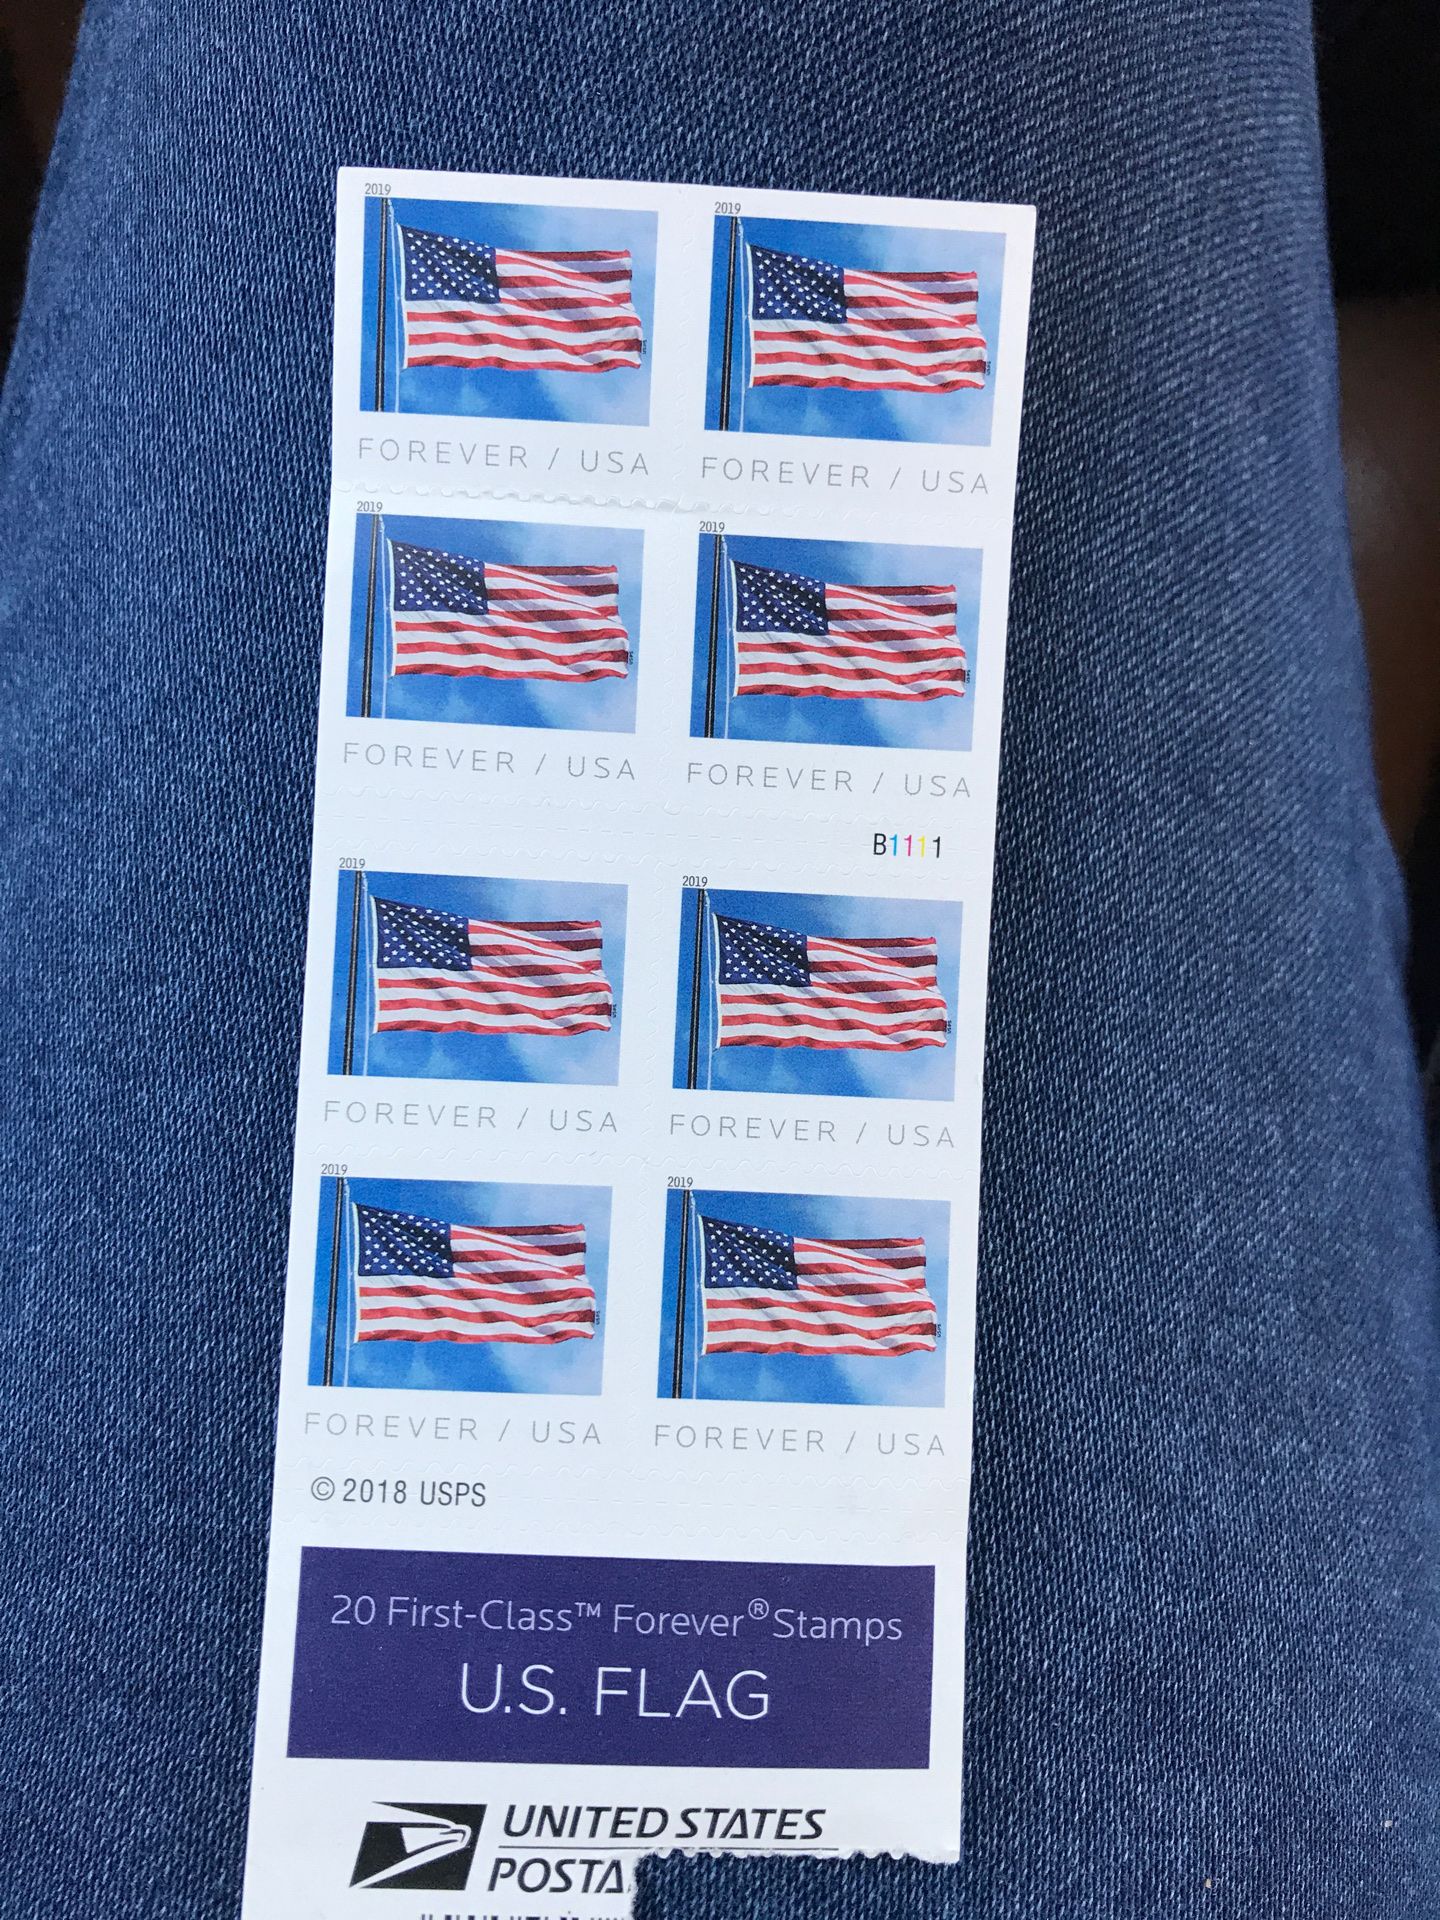 Postage stamps for less